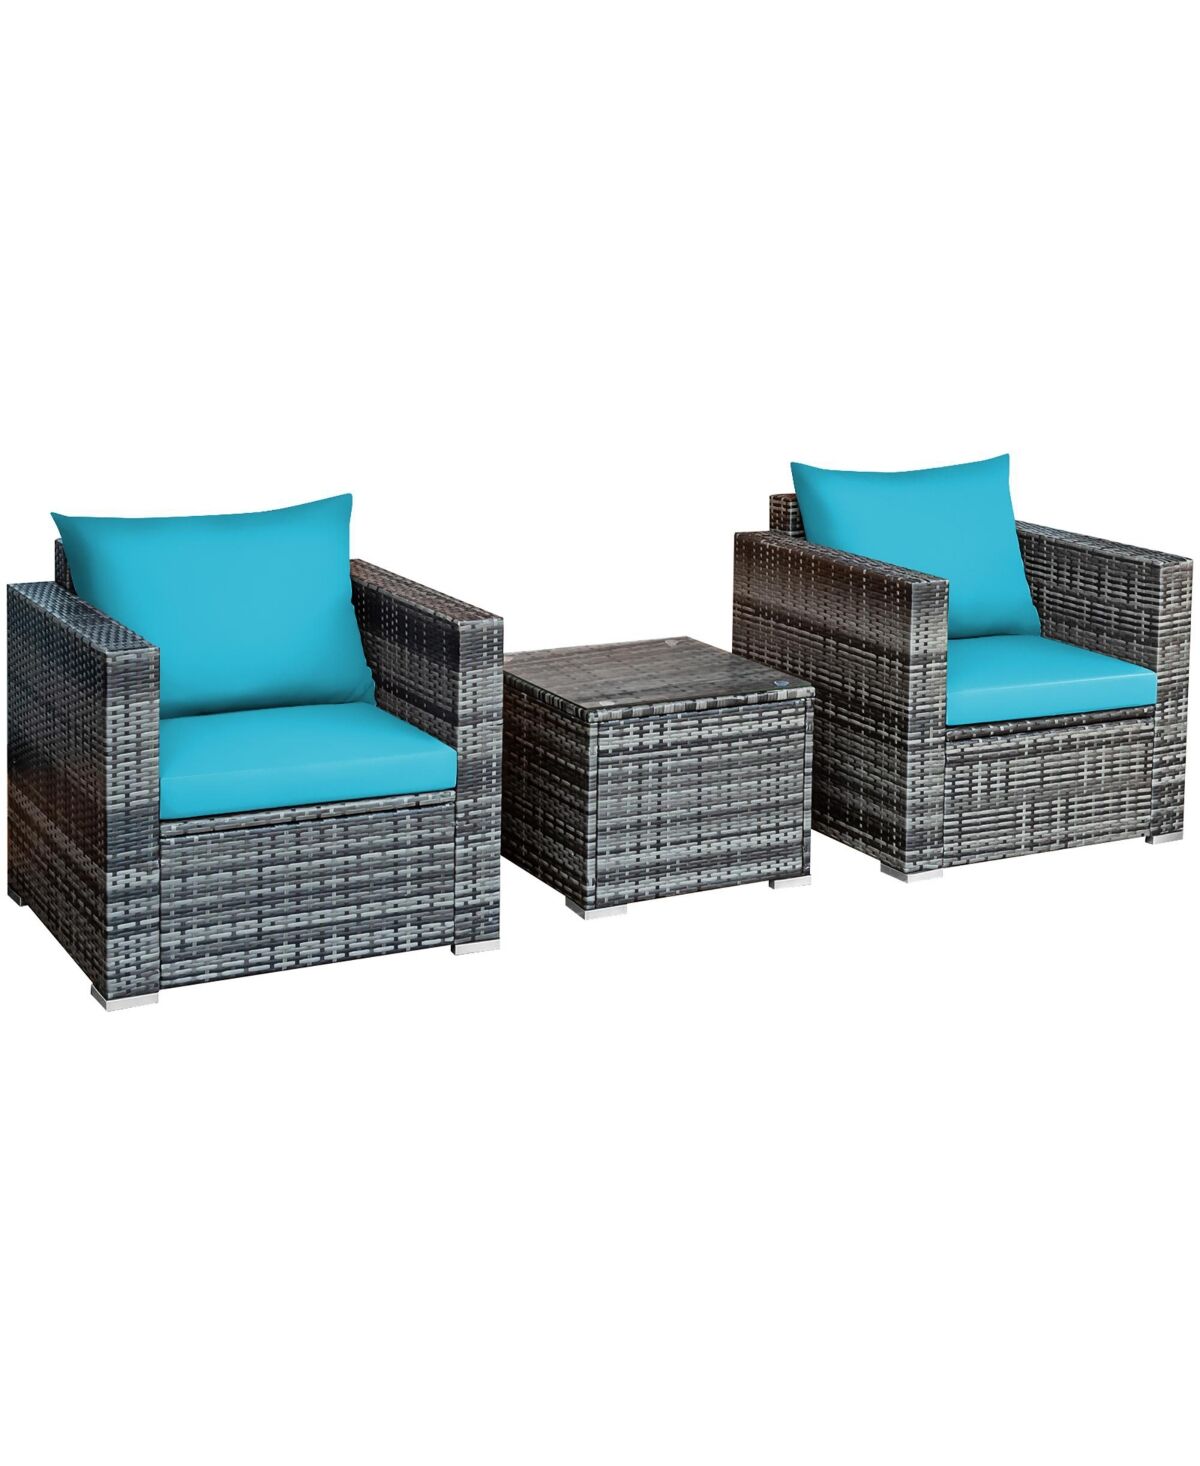 Costway 3 Pc Patio Rattan Furniture Bistro Set Cushioned Sofa Chair Table - Blue